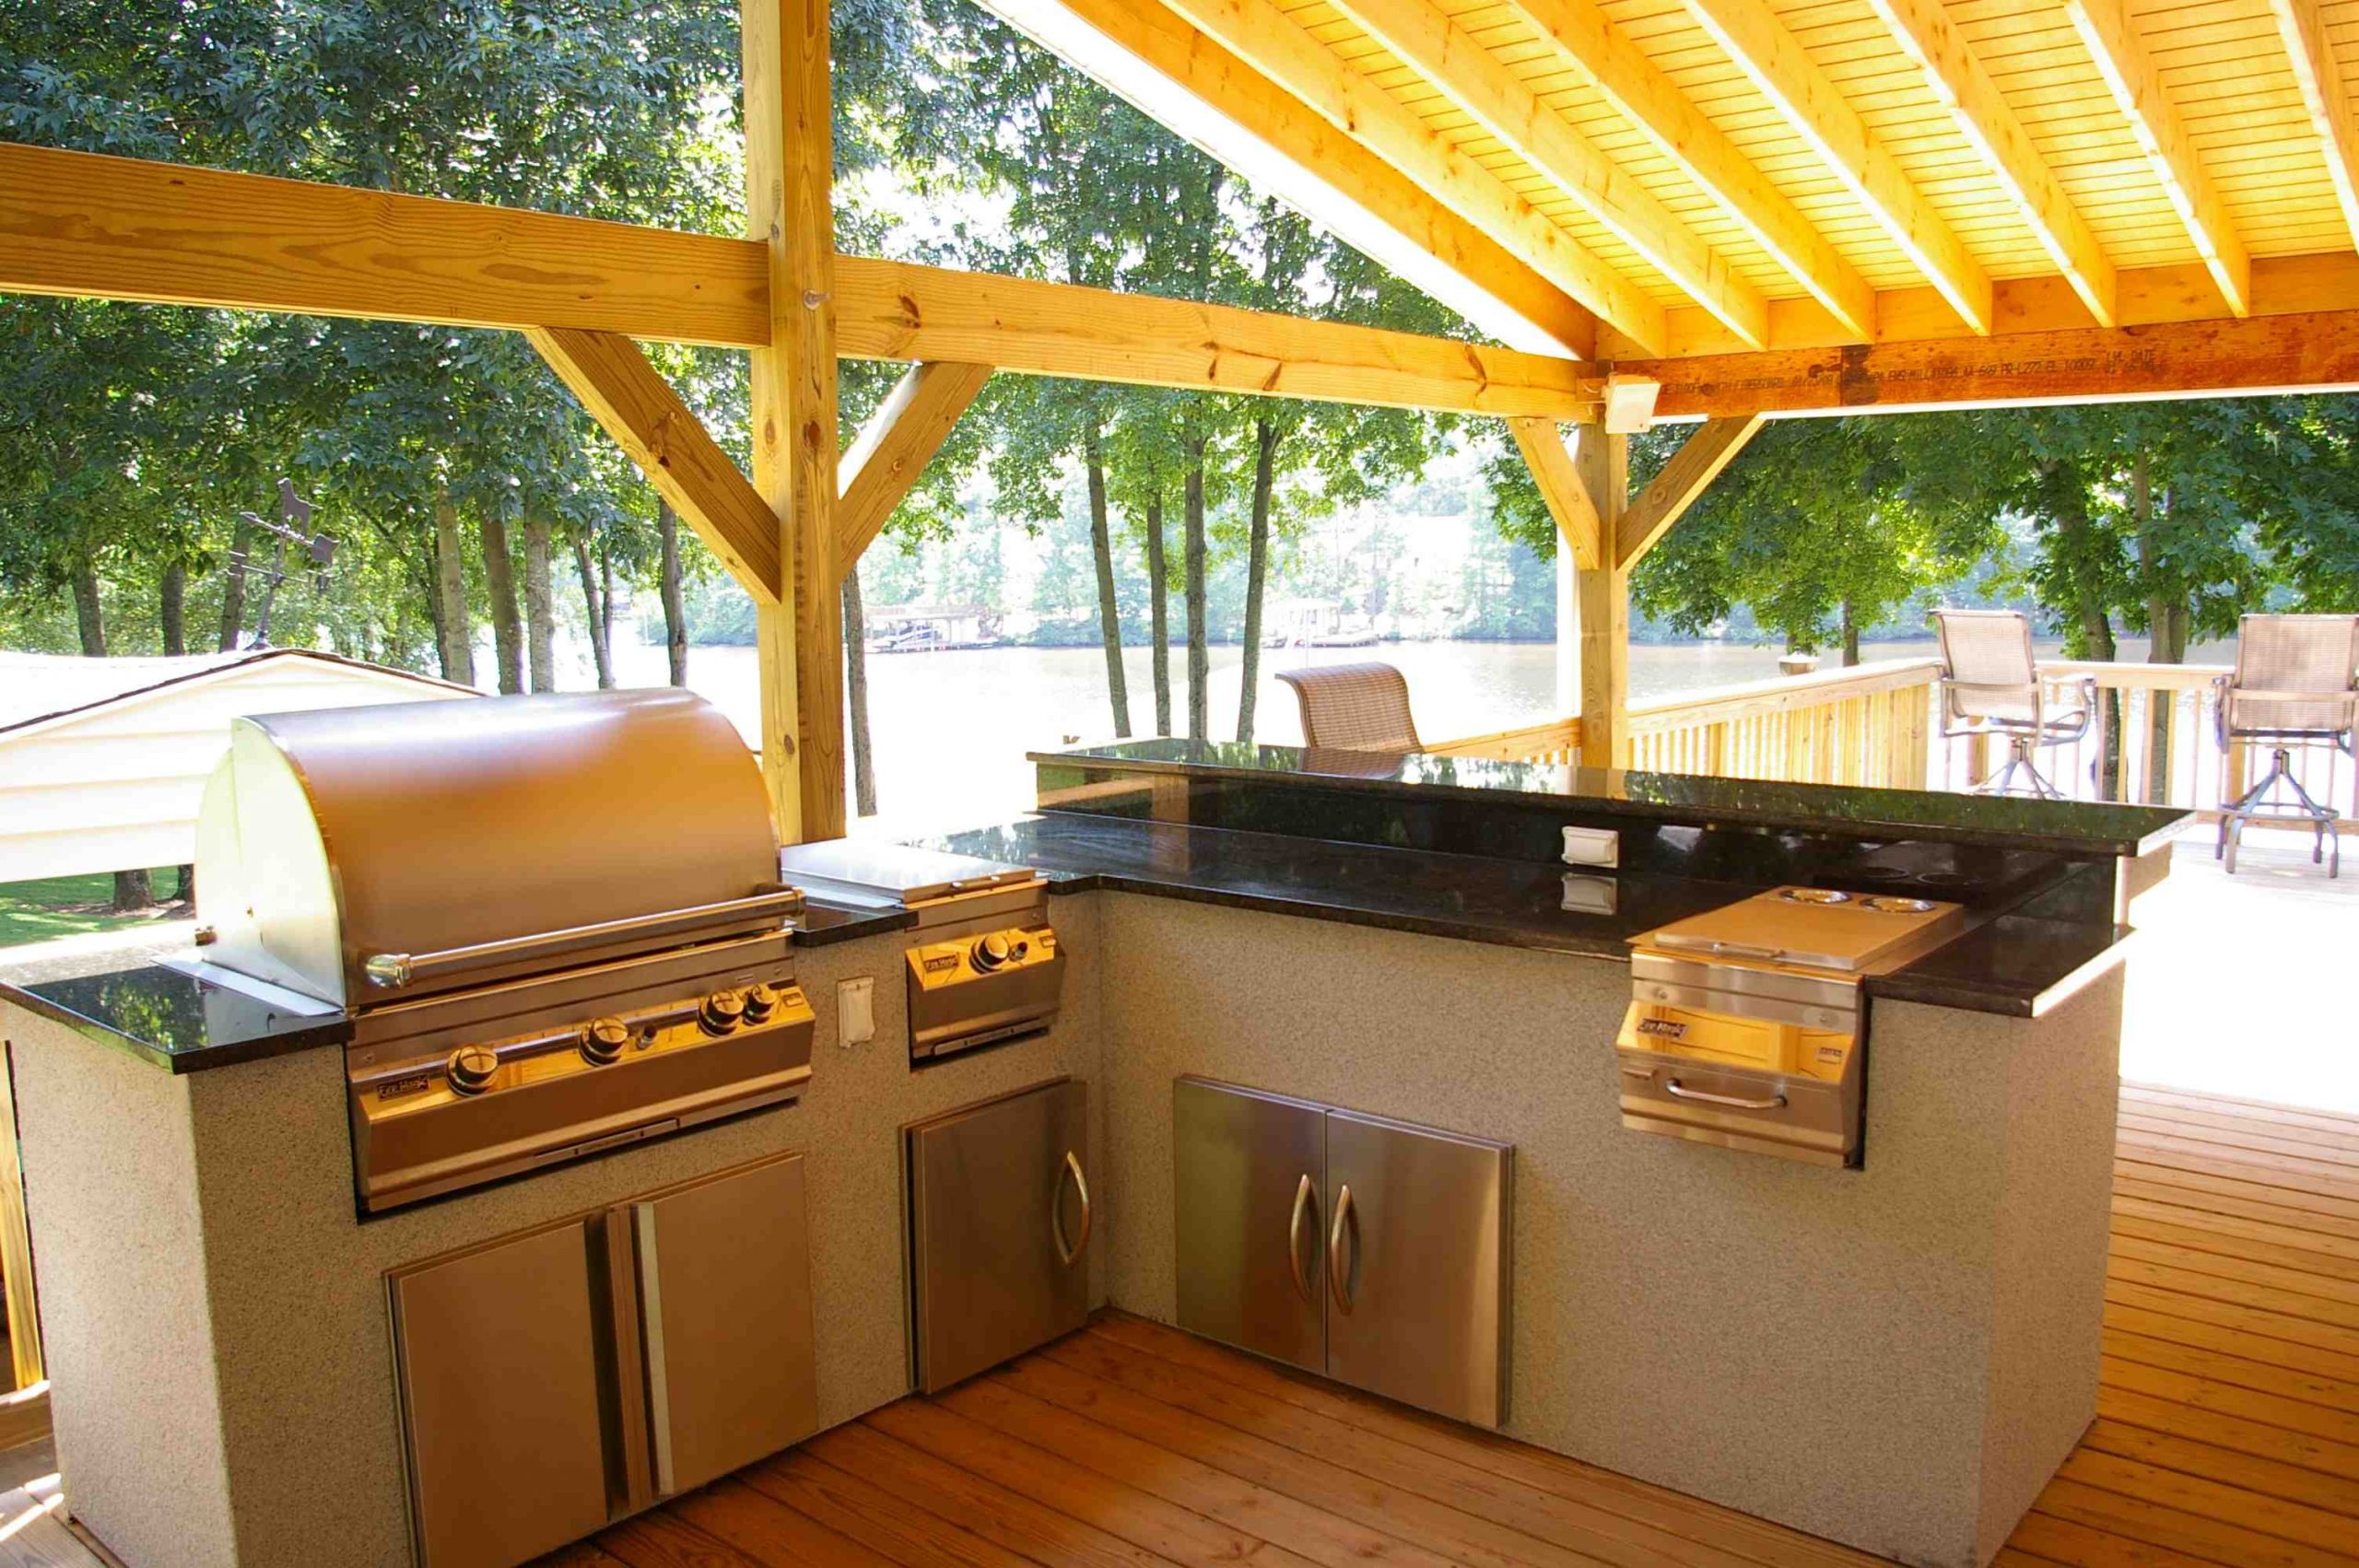 Covered Outdoor Kitchen Plans
 Outdoor Kitchens is among the preferred house decoration